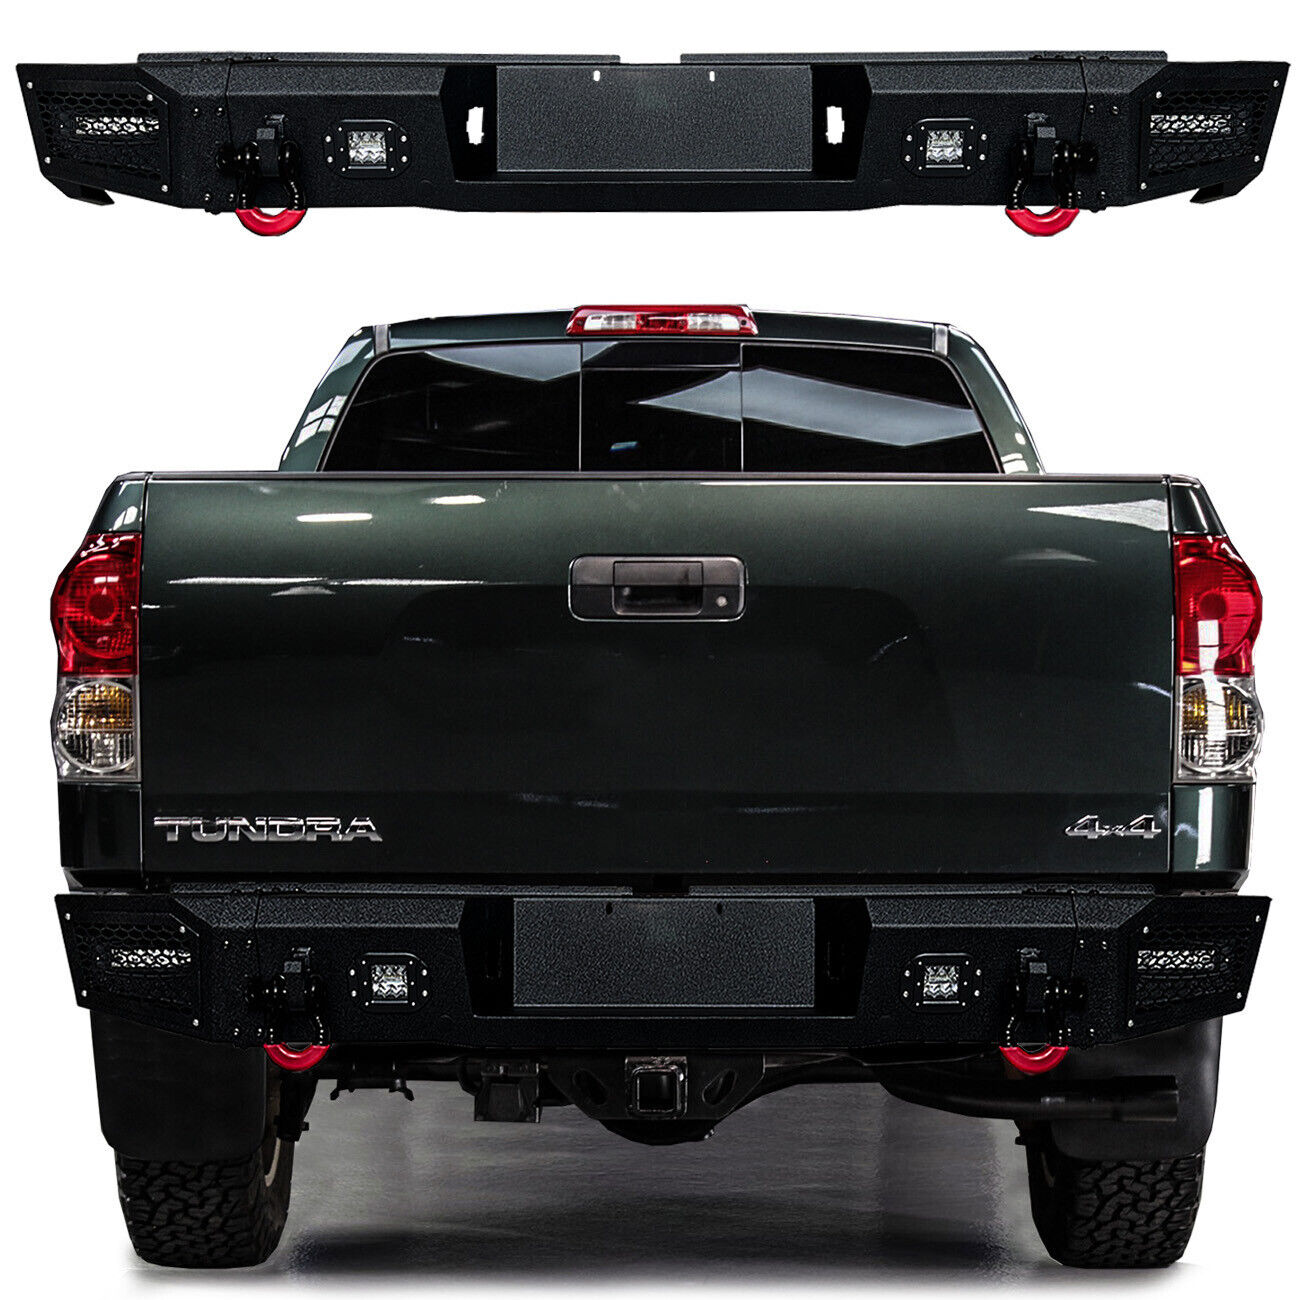 Vijay For 2007-2013 Tundra Rear Bumper Textured Black w/ LED lights and D-rings